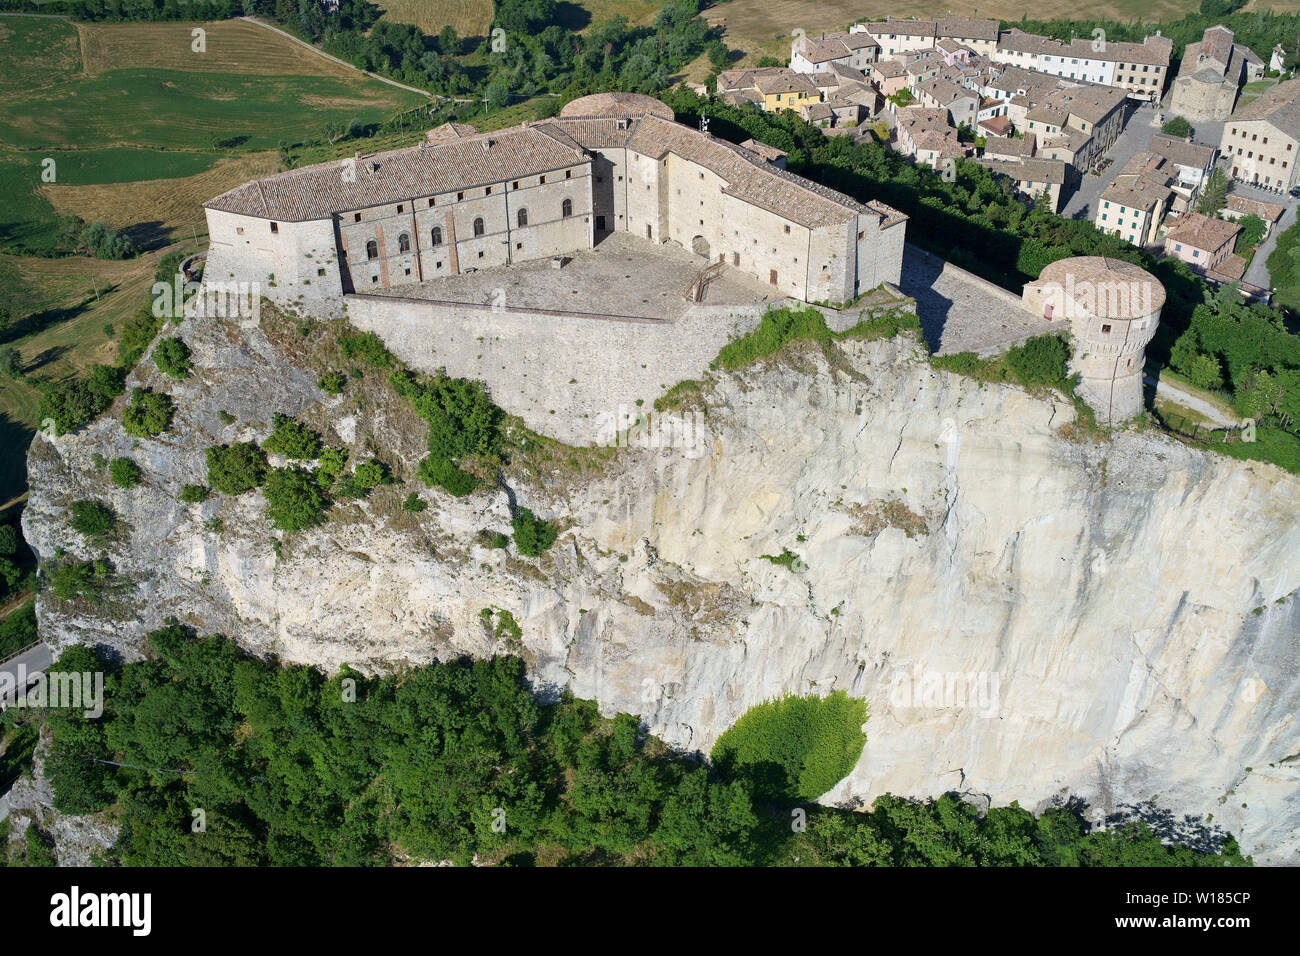 AERIAL VIEW. Medieval fortress standing on an isolated mesa. San Leo, Province of Rimini, Emilia-Romagna, Italy. Stock Photo